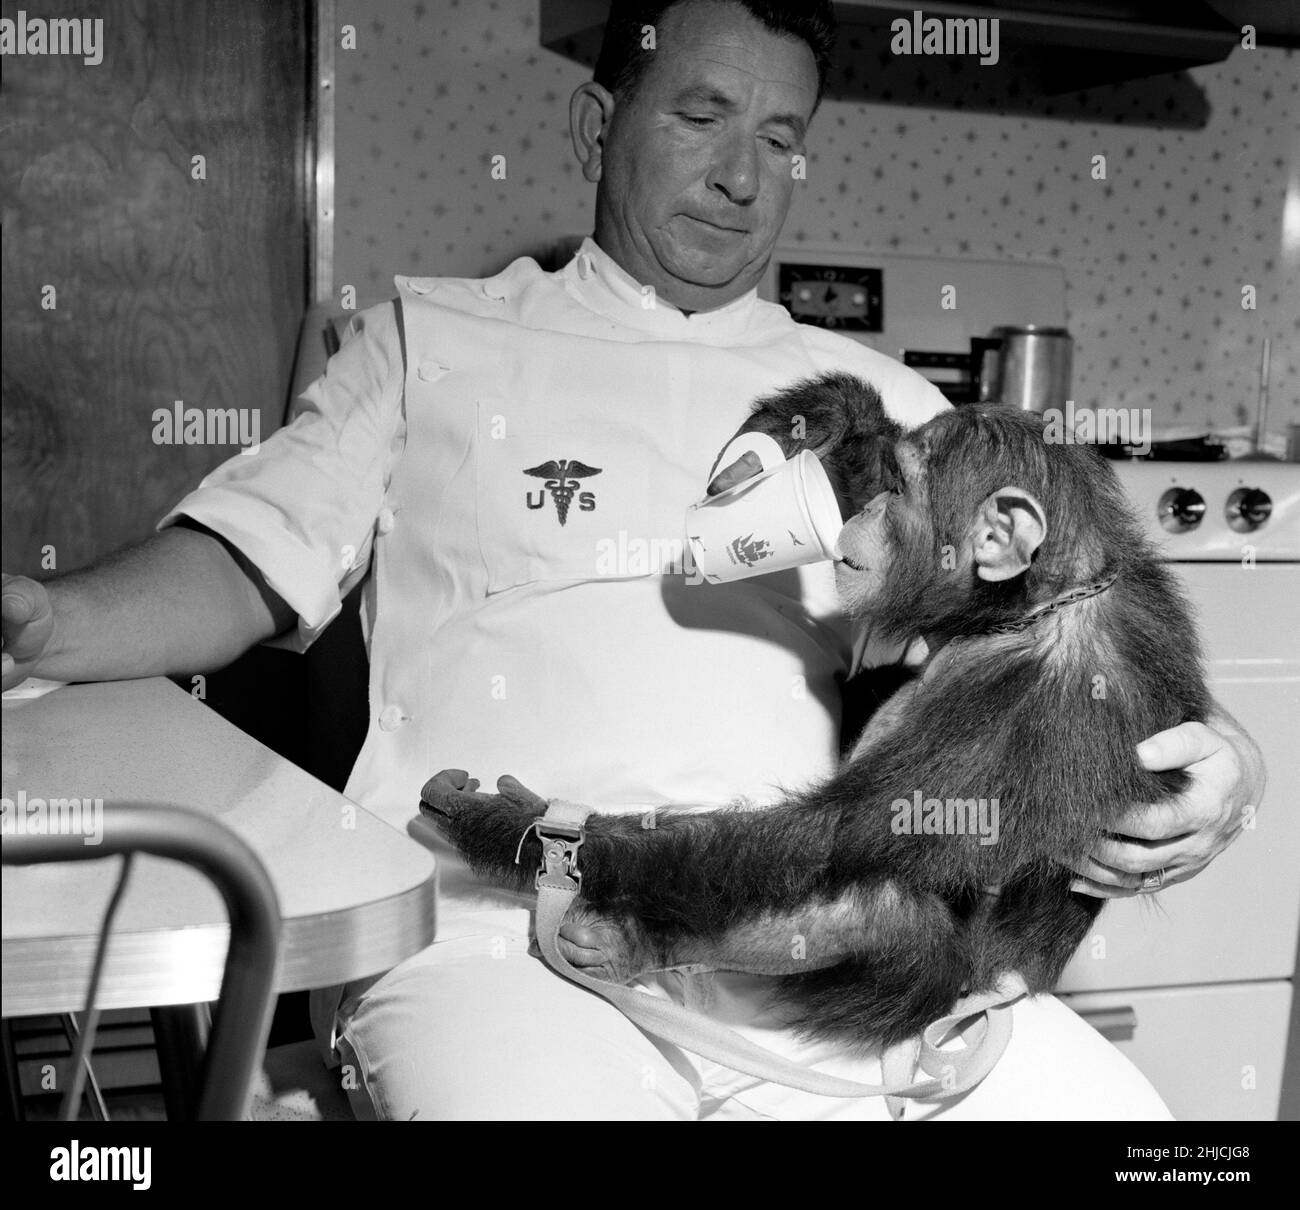 Enos with his handler drinking from cup. Enos (d. November 4, 1962) was the 2nd chimp launched into space and the first chimp to achieve Earth orbit. Enos' flight occurred on November 29, 1961. His training was more intense for him than for his predecessor Ham, because Enos was exposed to weightlessness and higher gs for longer periods of time. His training included psychomotor instruction and aircraft flights. Enos died of shigellosis-related dysentery, which was resistant to then-known antibiotics. Pathologists reported no symptoms that could be attributed or related to his space flight. Stock Photo